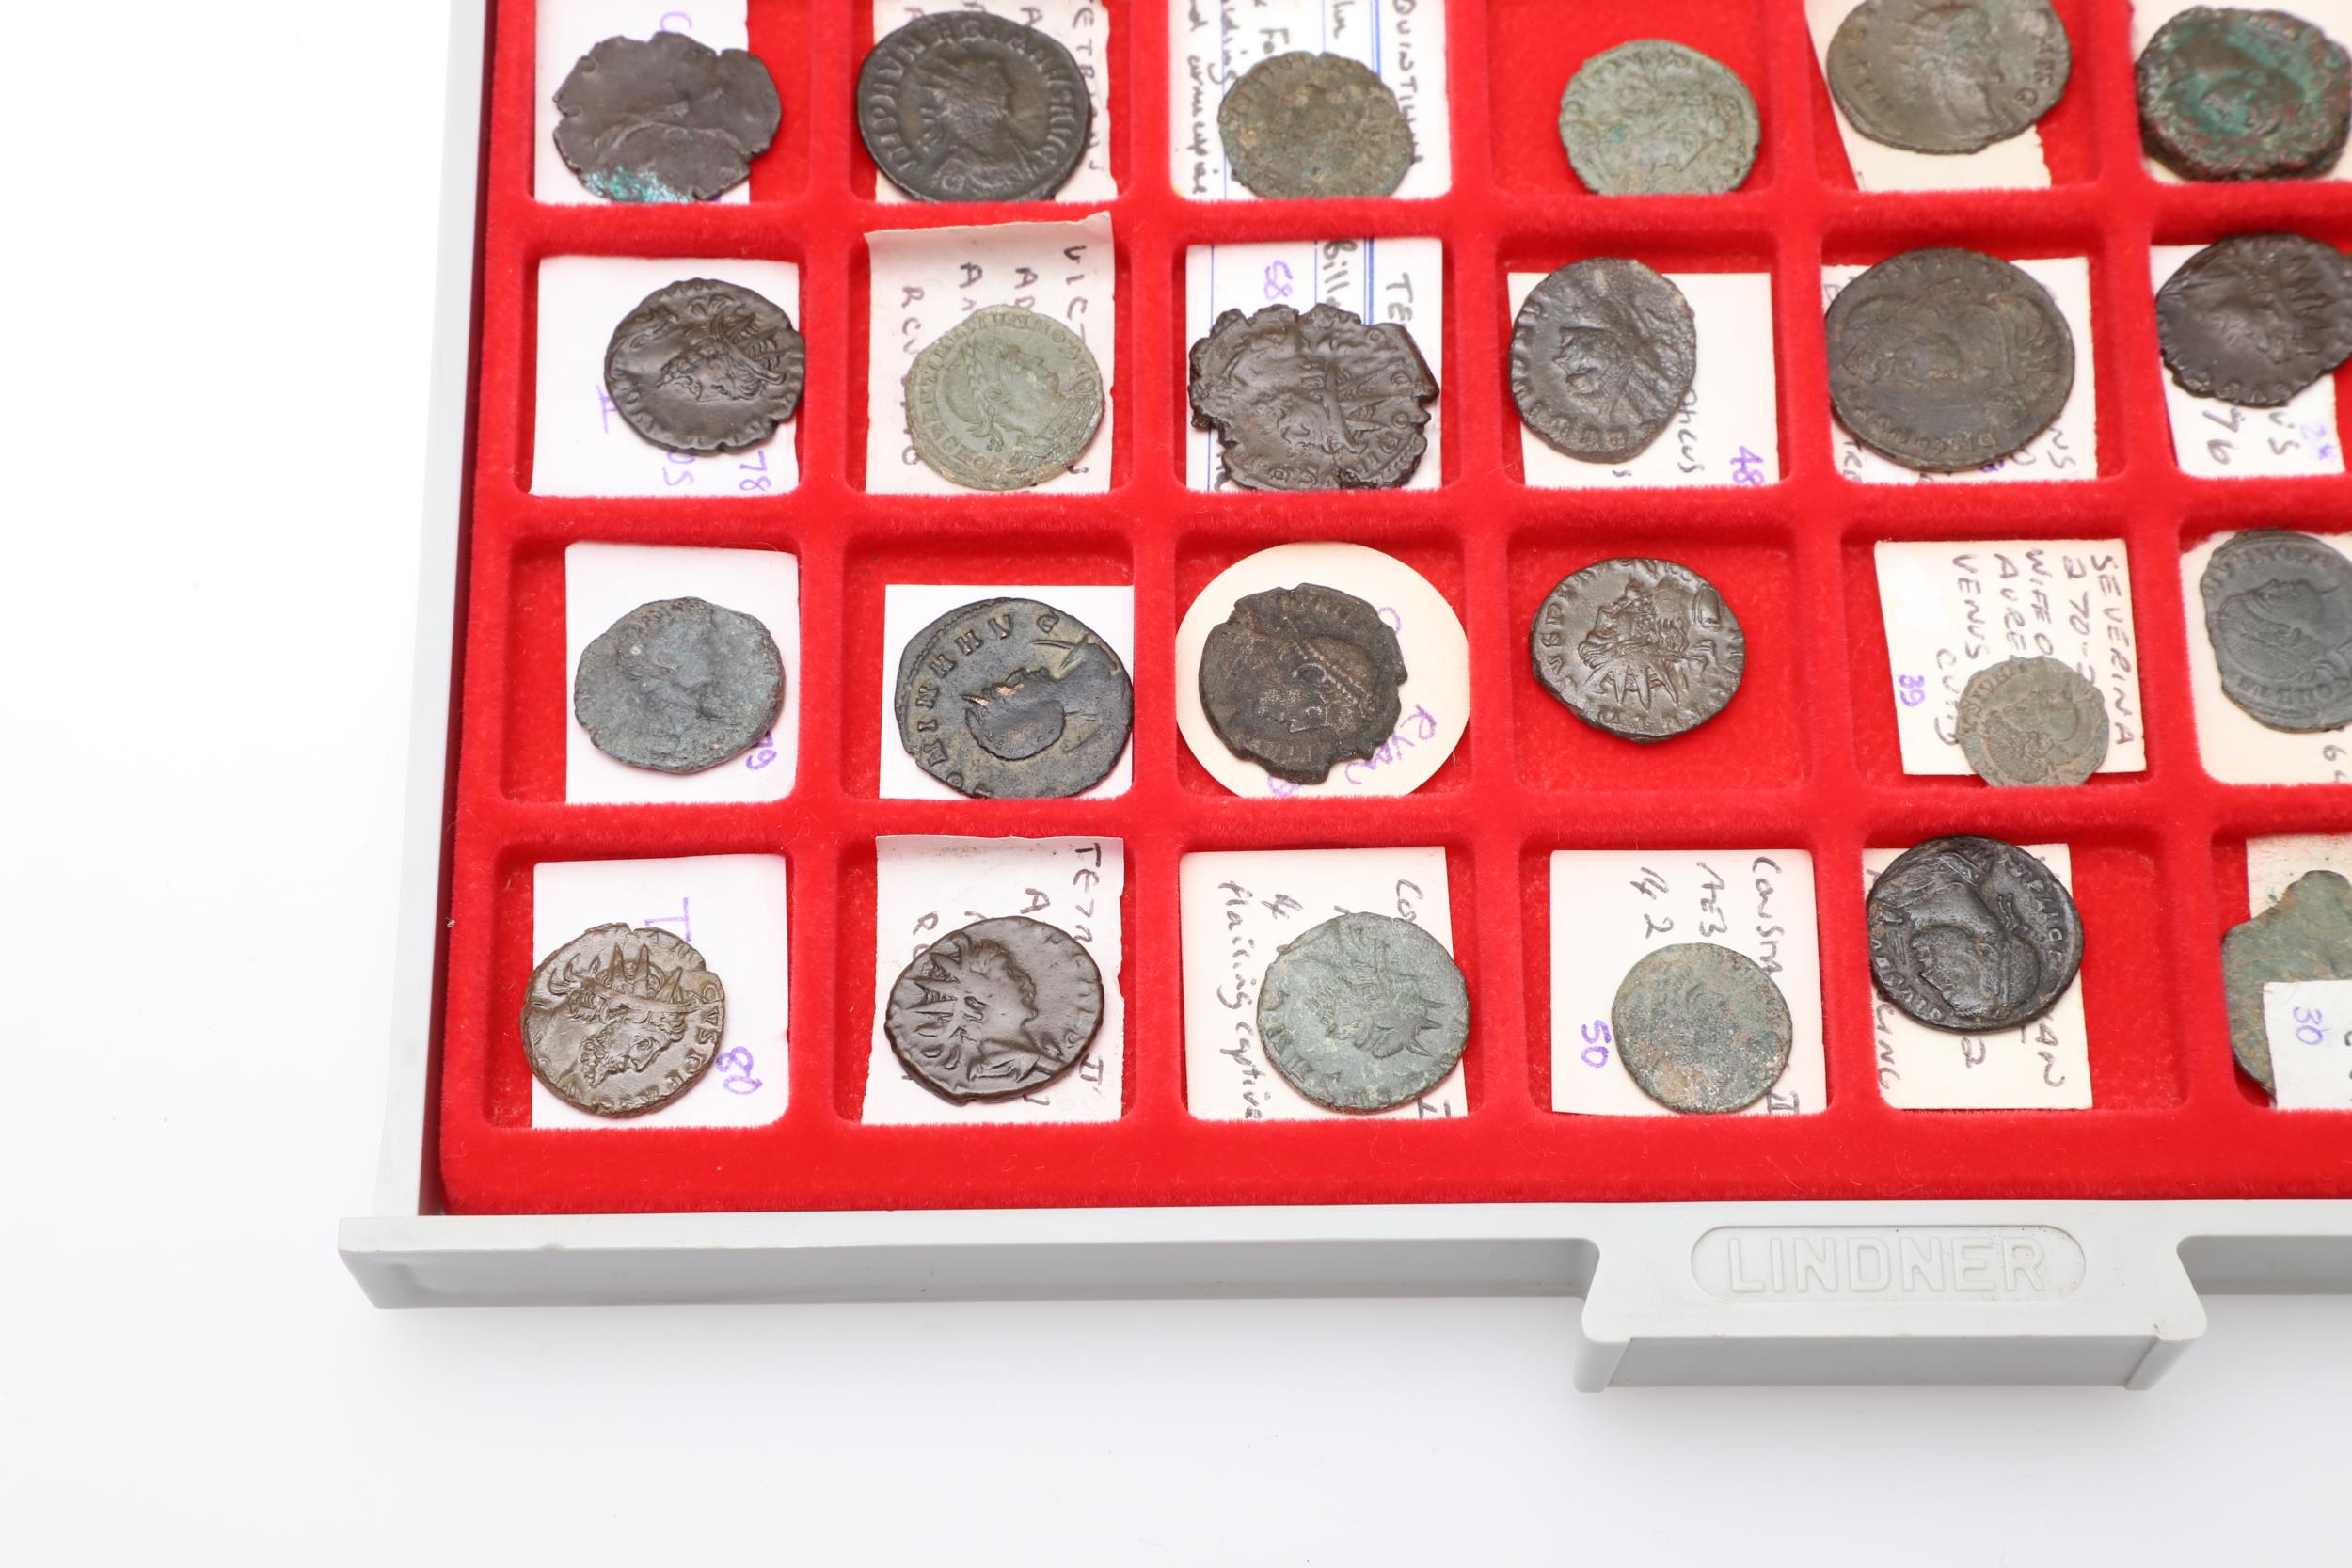 A COLLECTION OF ROMAN COINS IN A LINDNER COIN TRAY. - Image 10 of 11